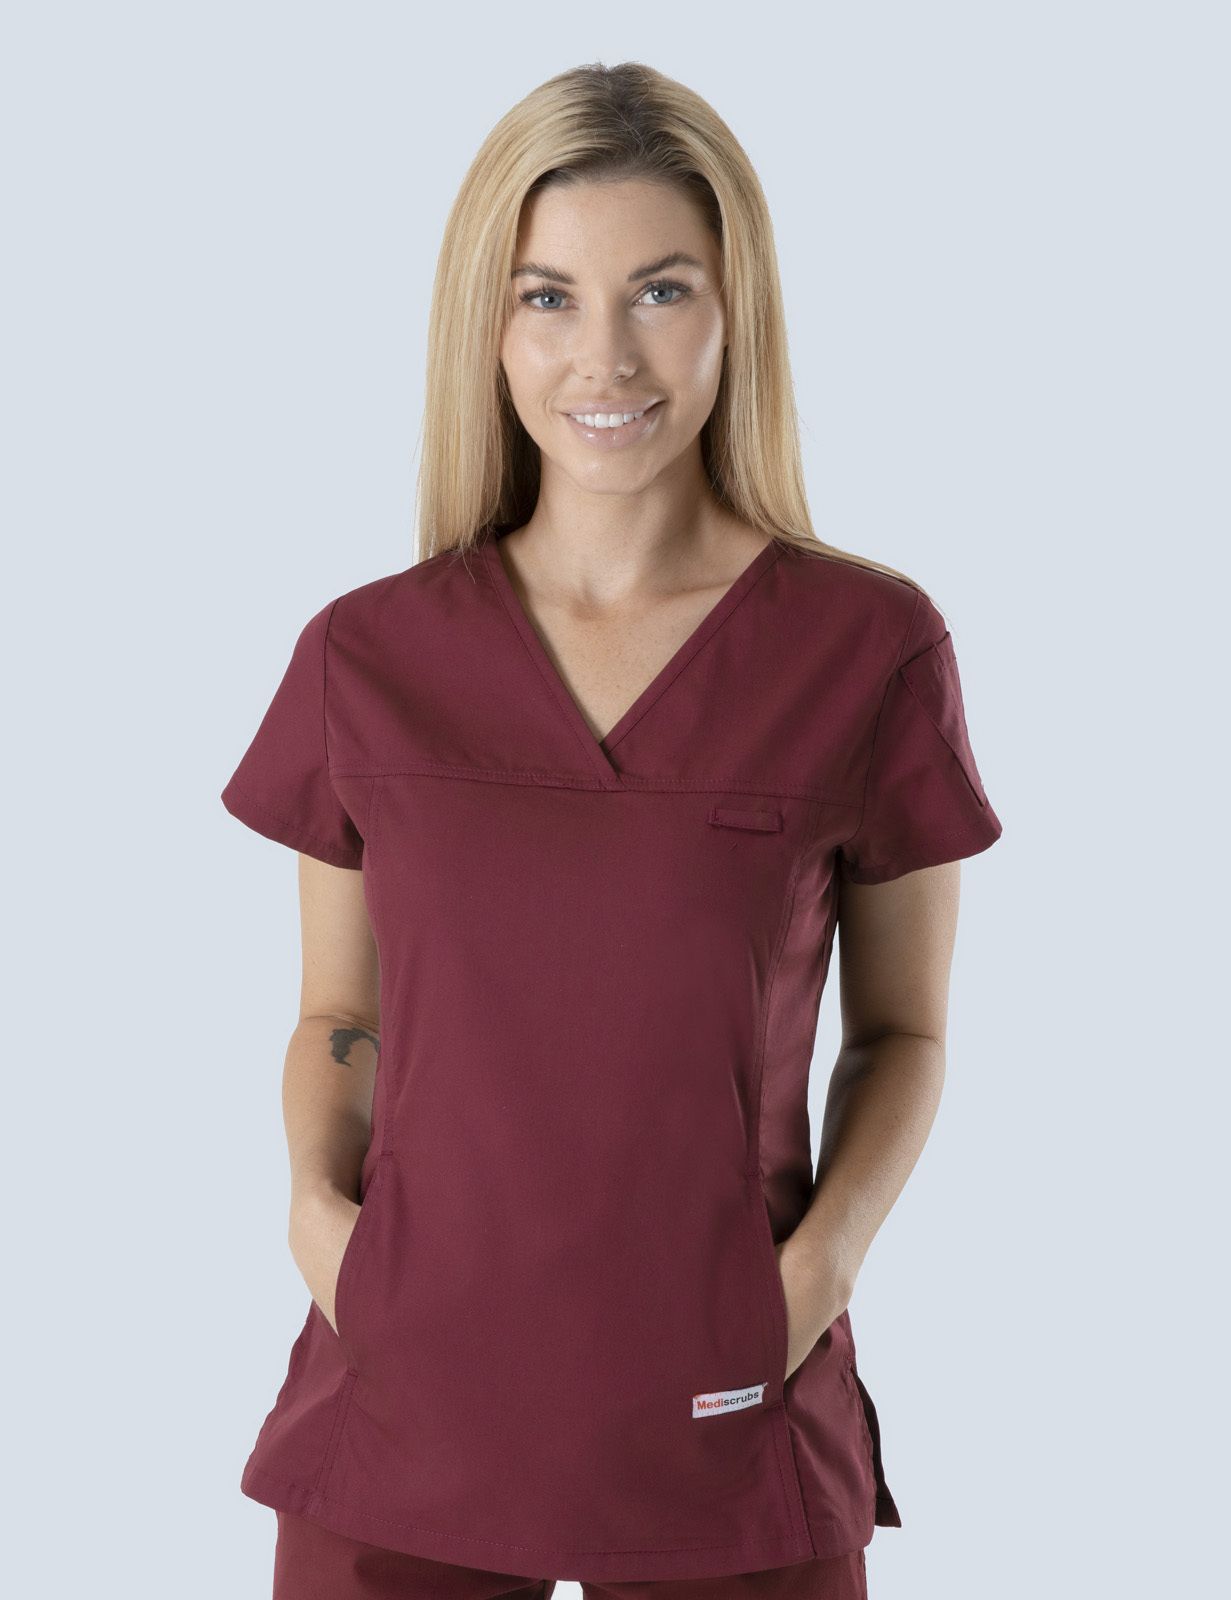 University Of Wollongong Uniform Top Only Bundle (Women's Fit Solid Top in Burgundy + Logos)